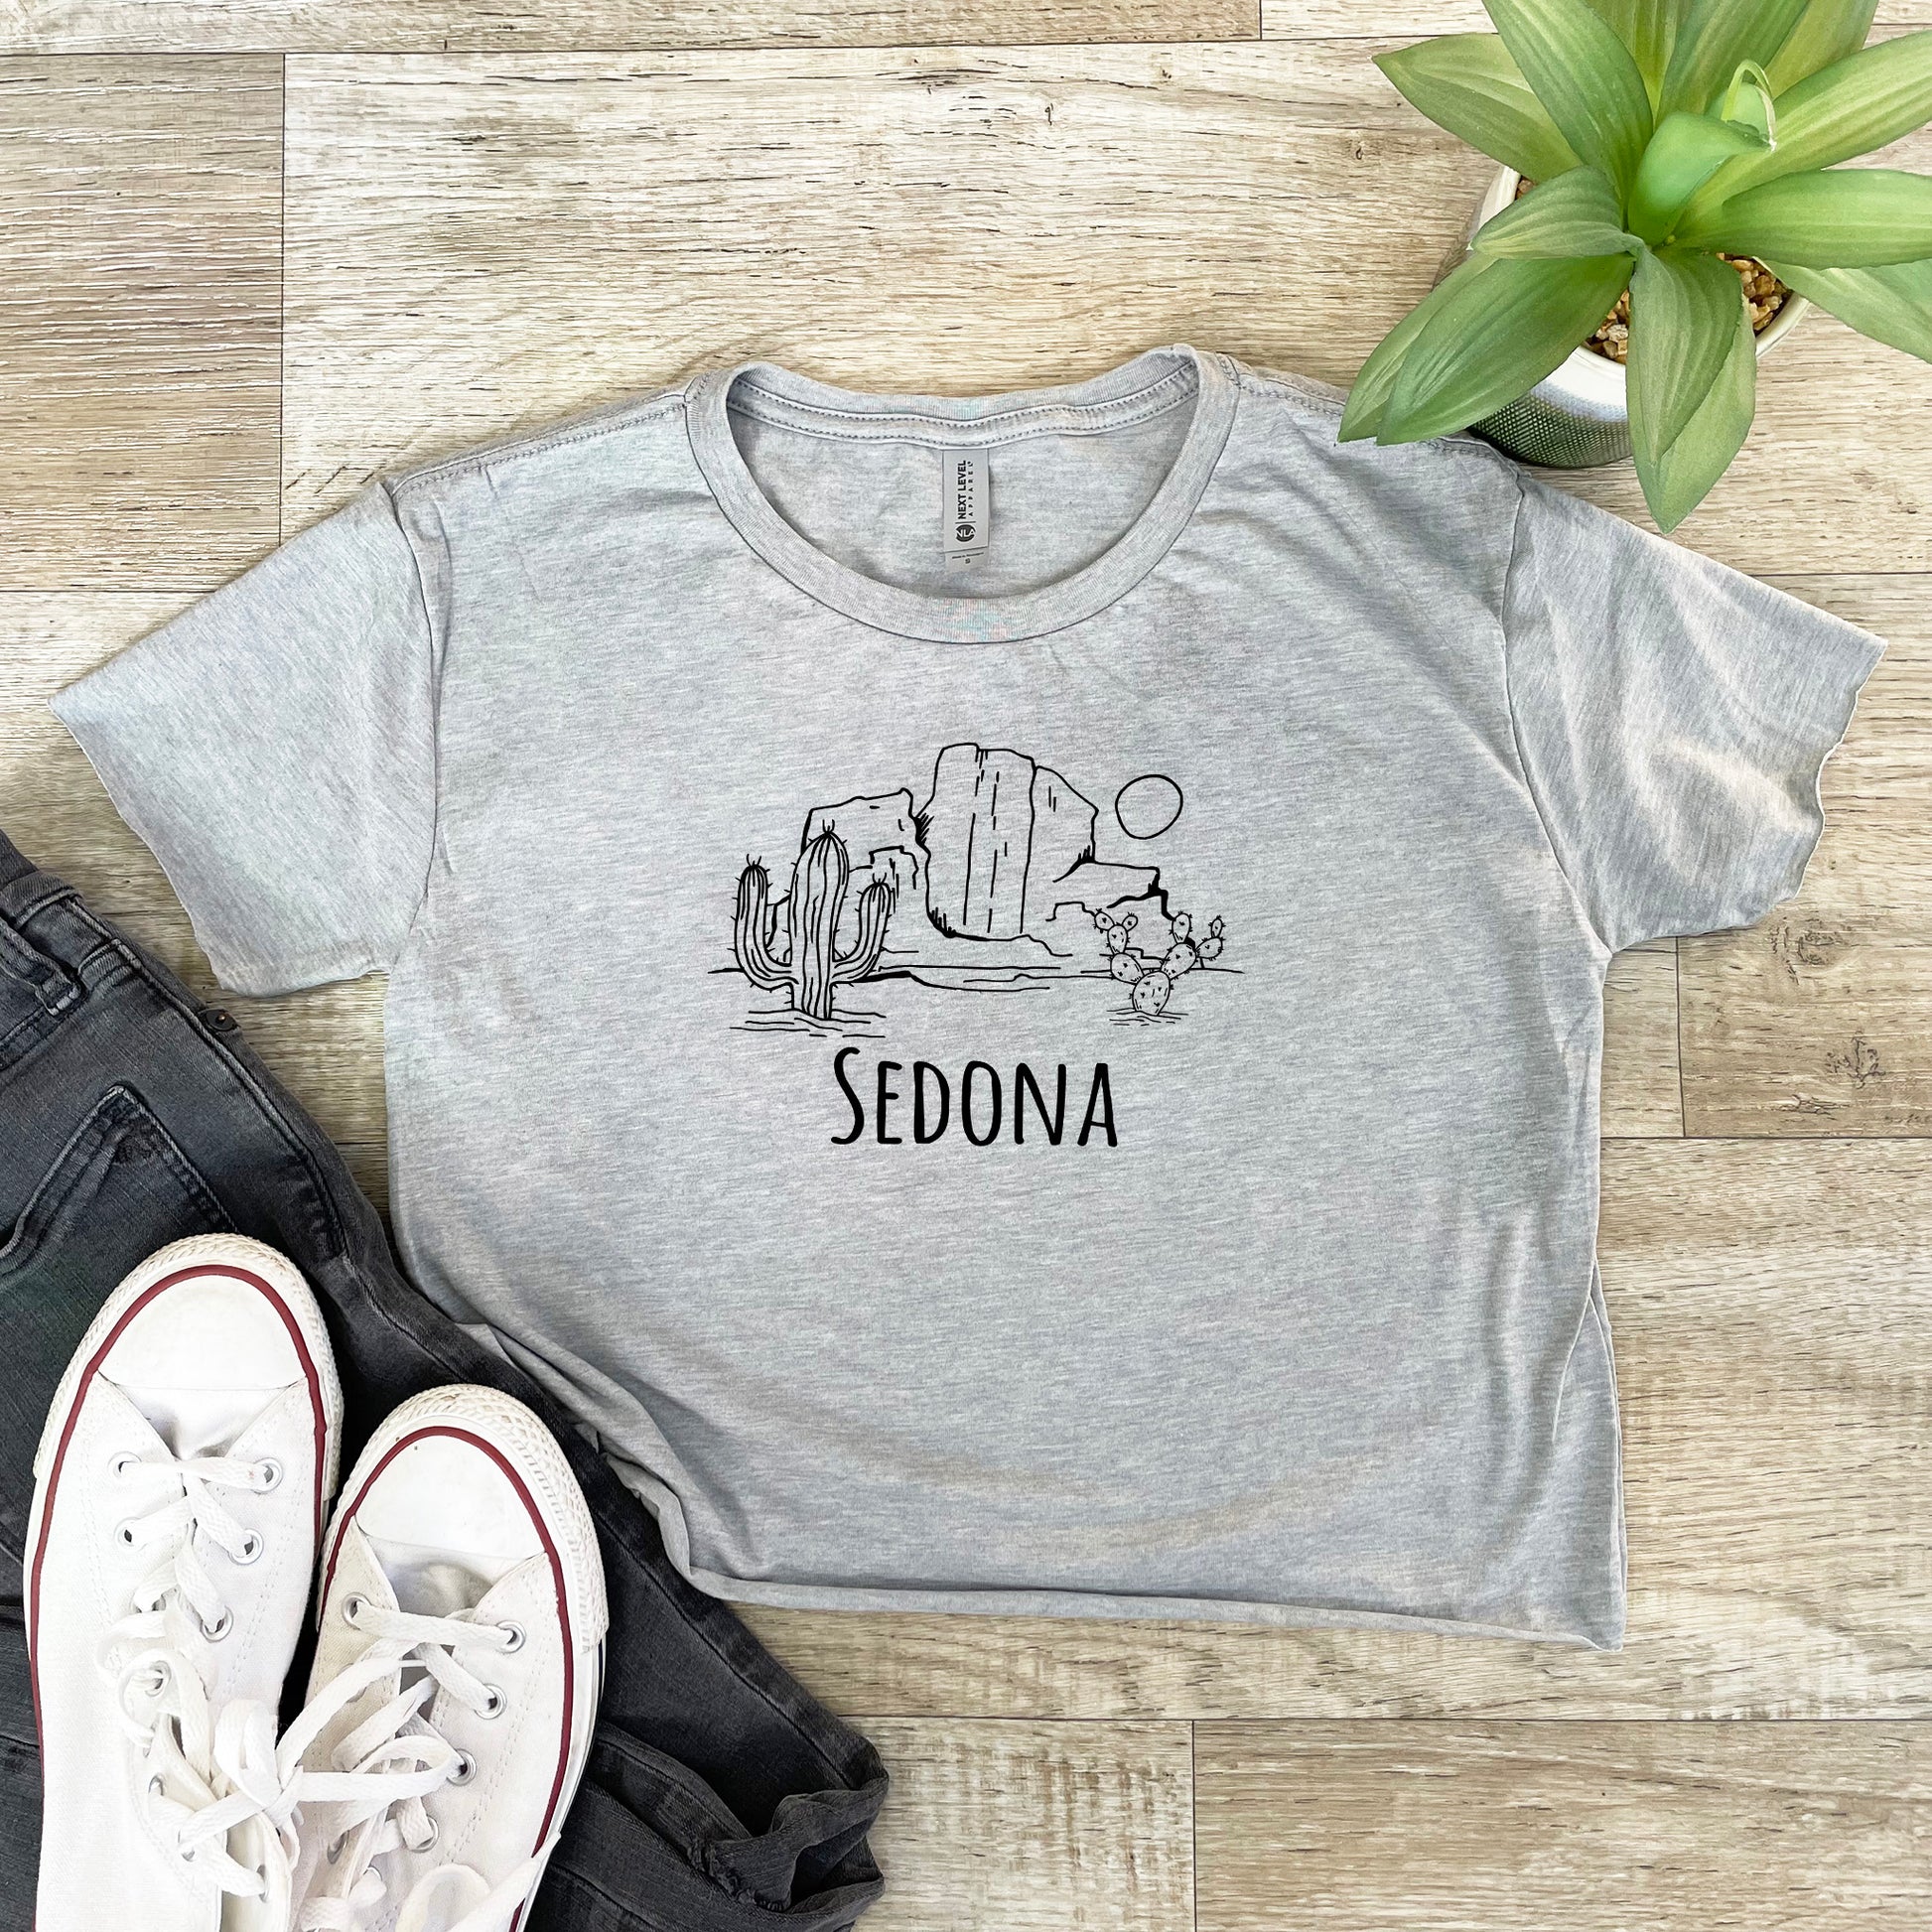 a t - shirt that says sedona with a cactus on it